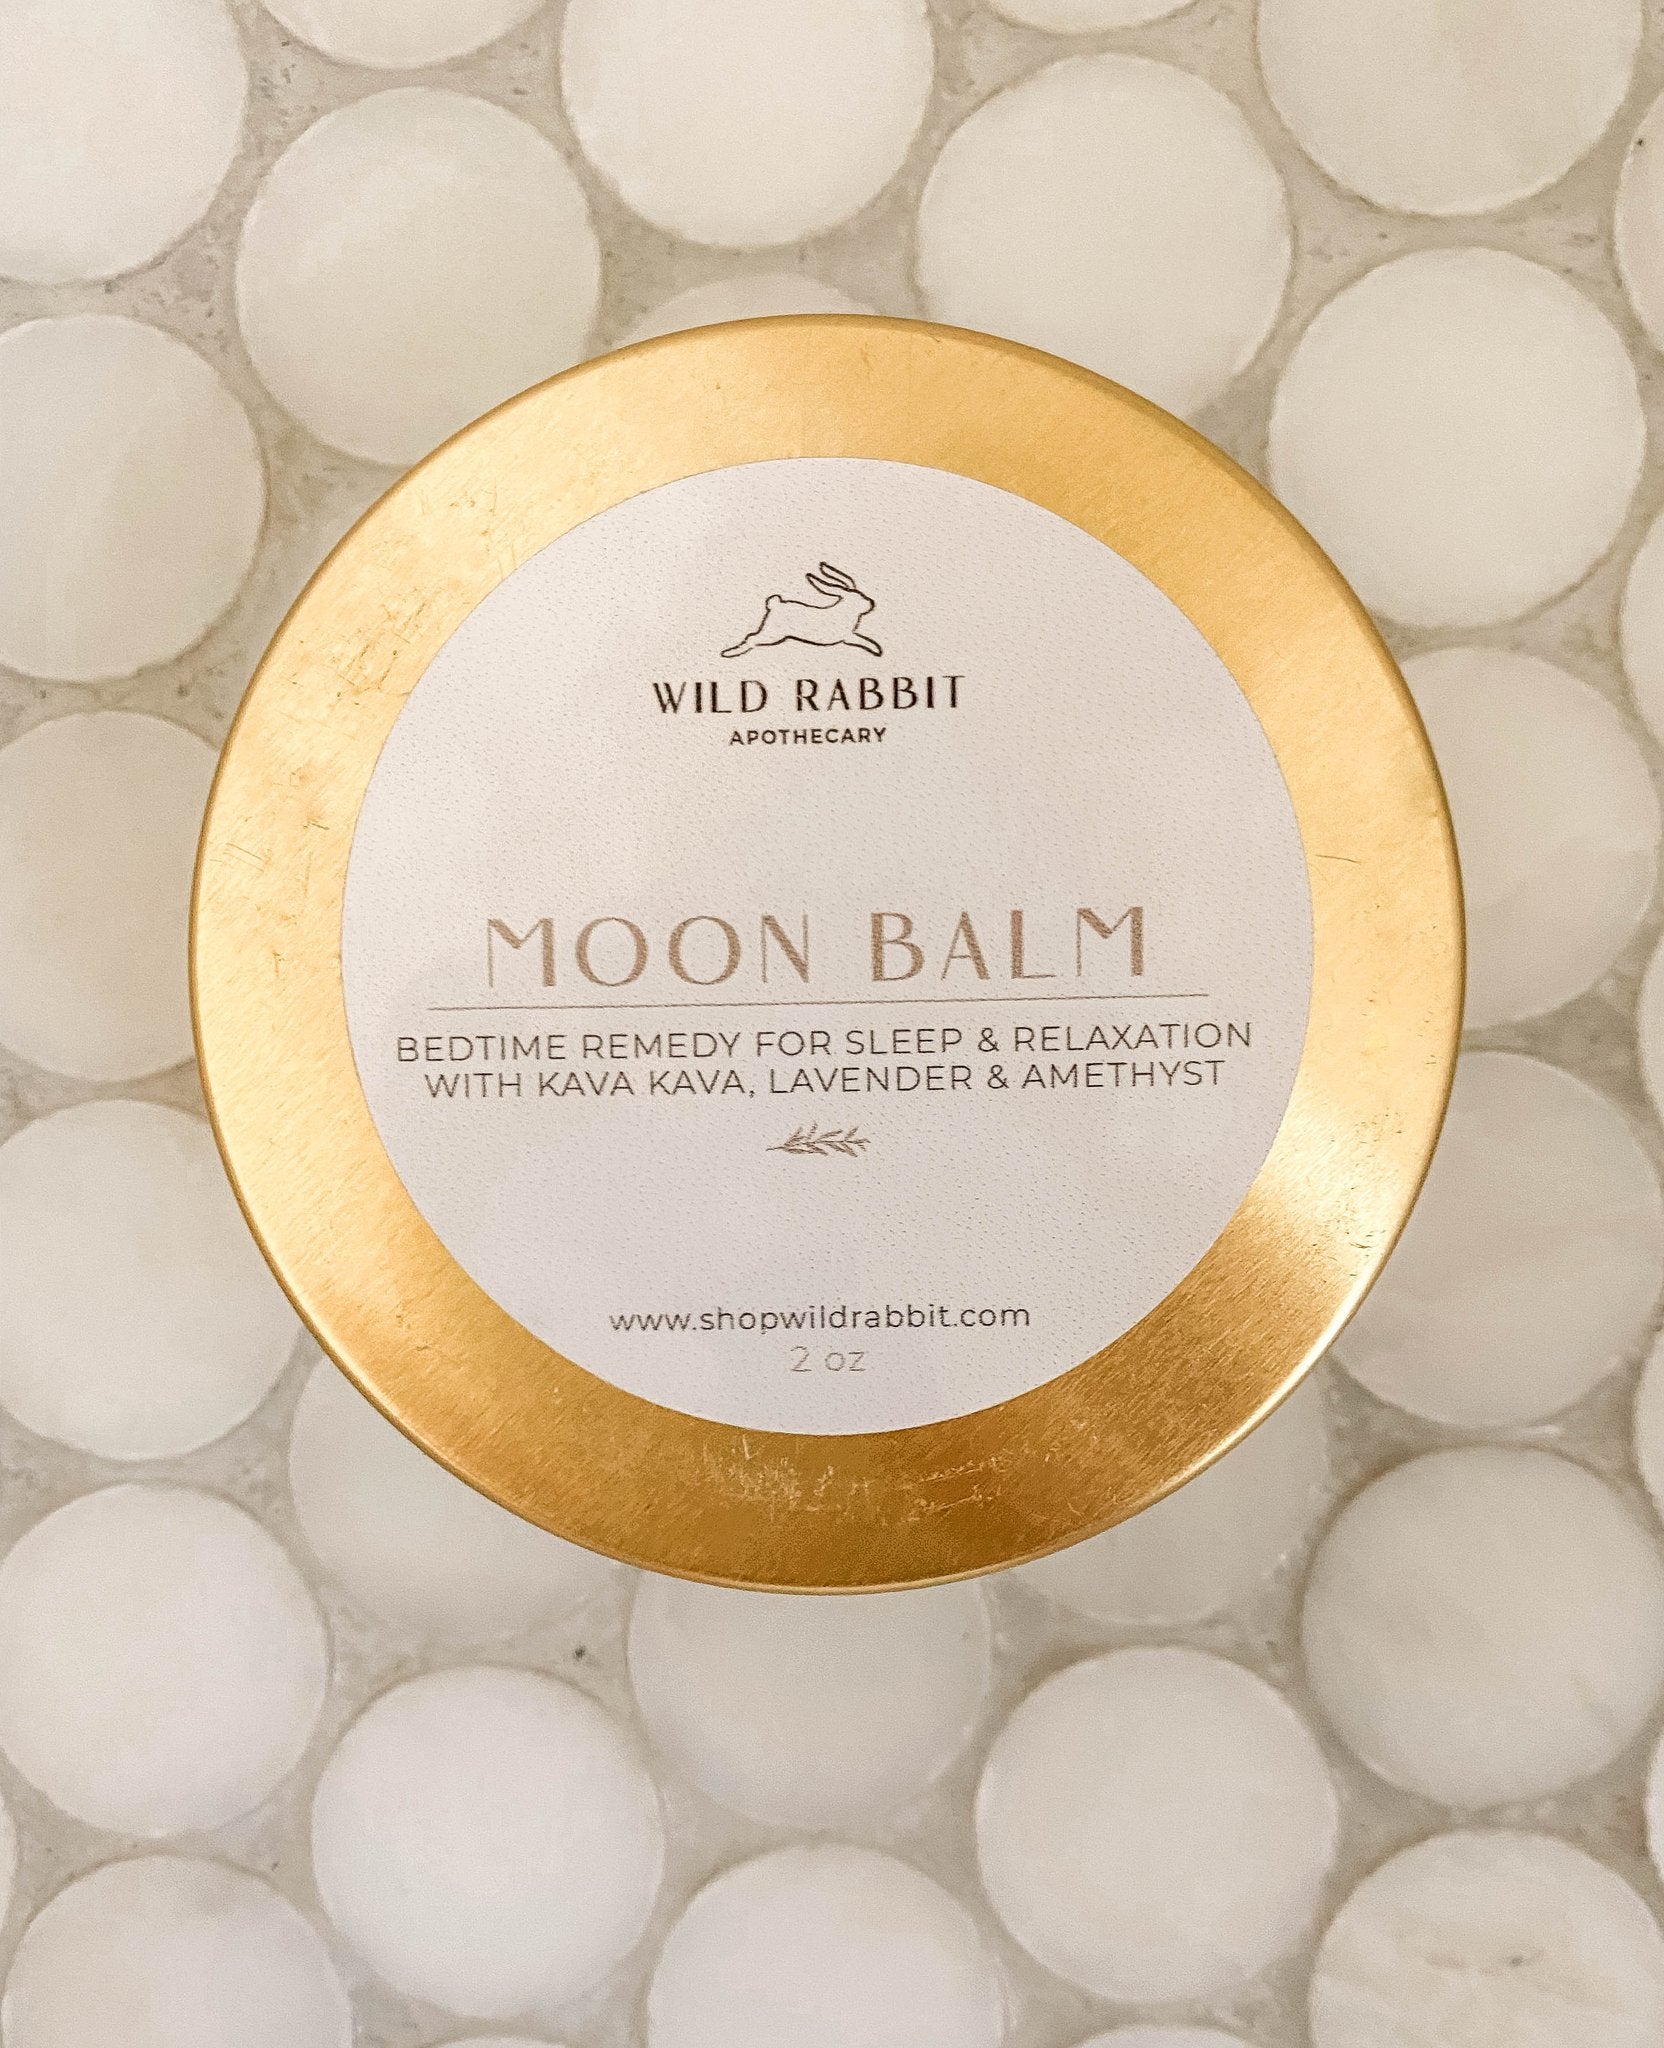 Wild Rabbit Moon Balm: Bedtime Remedy for Sleep & Relaxation with Kava Kava, Lavender and Amethyst